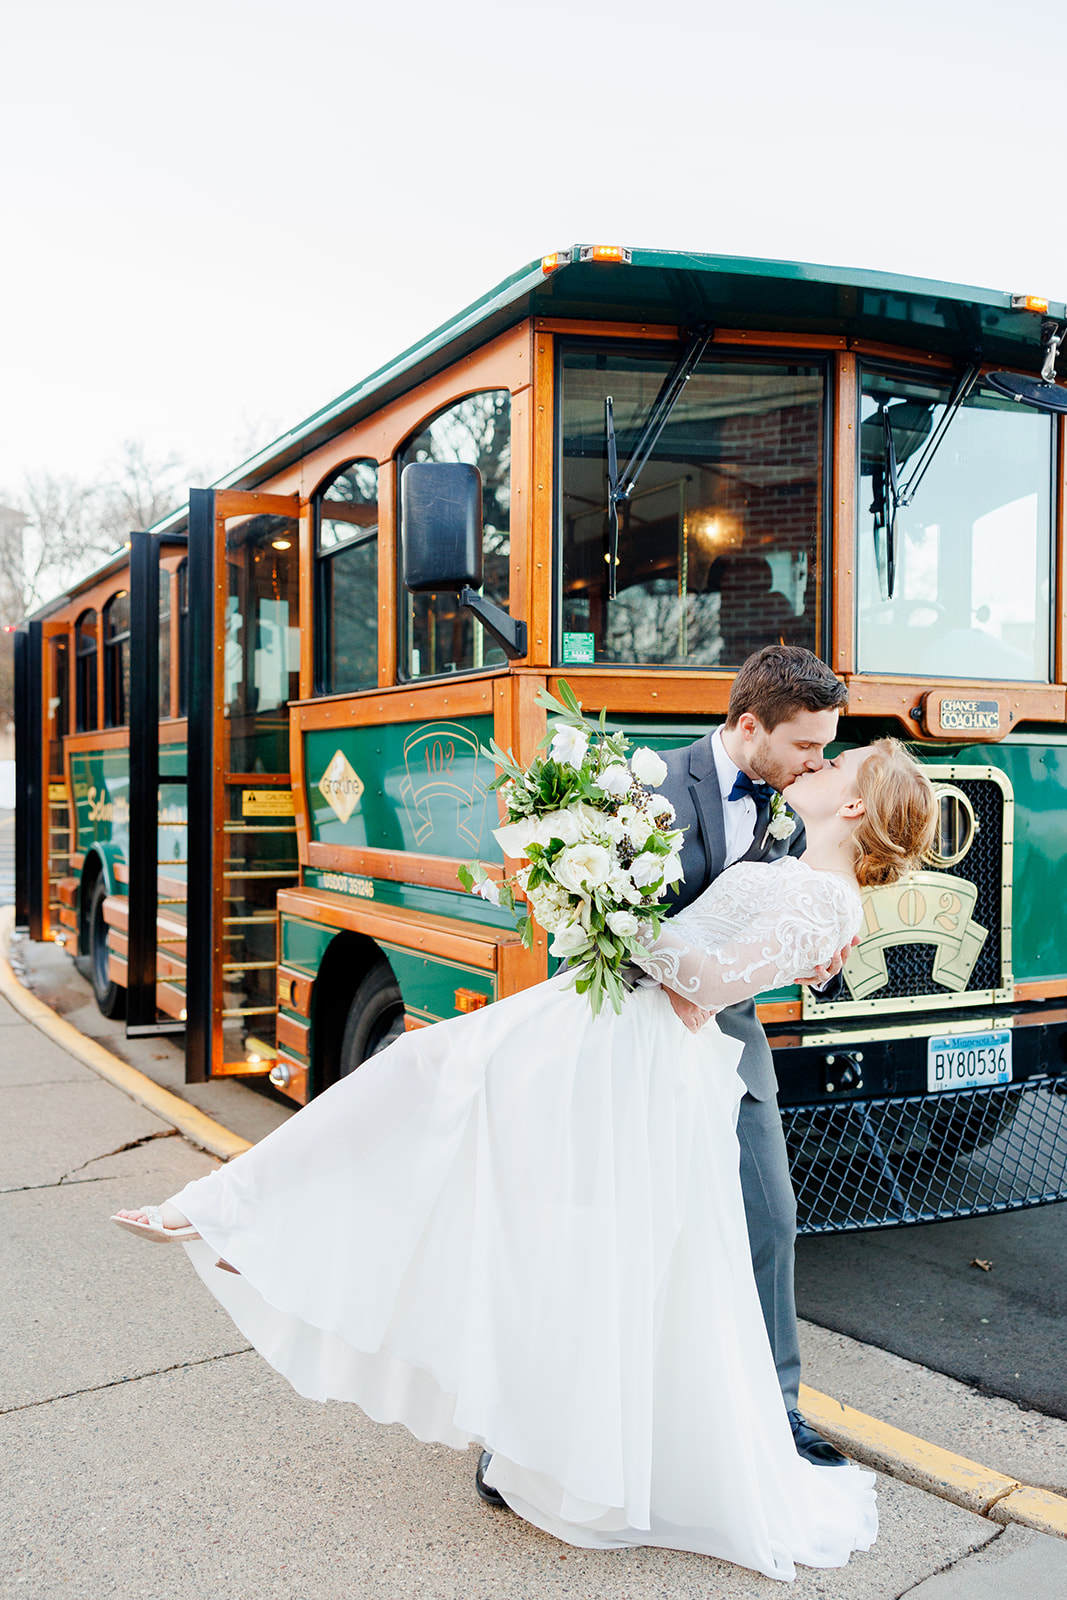 Bride and groom kisses in front of a trolley